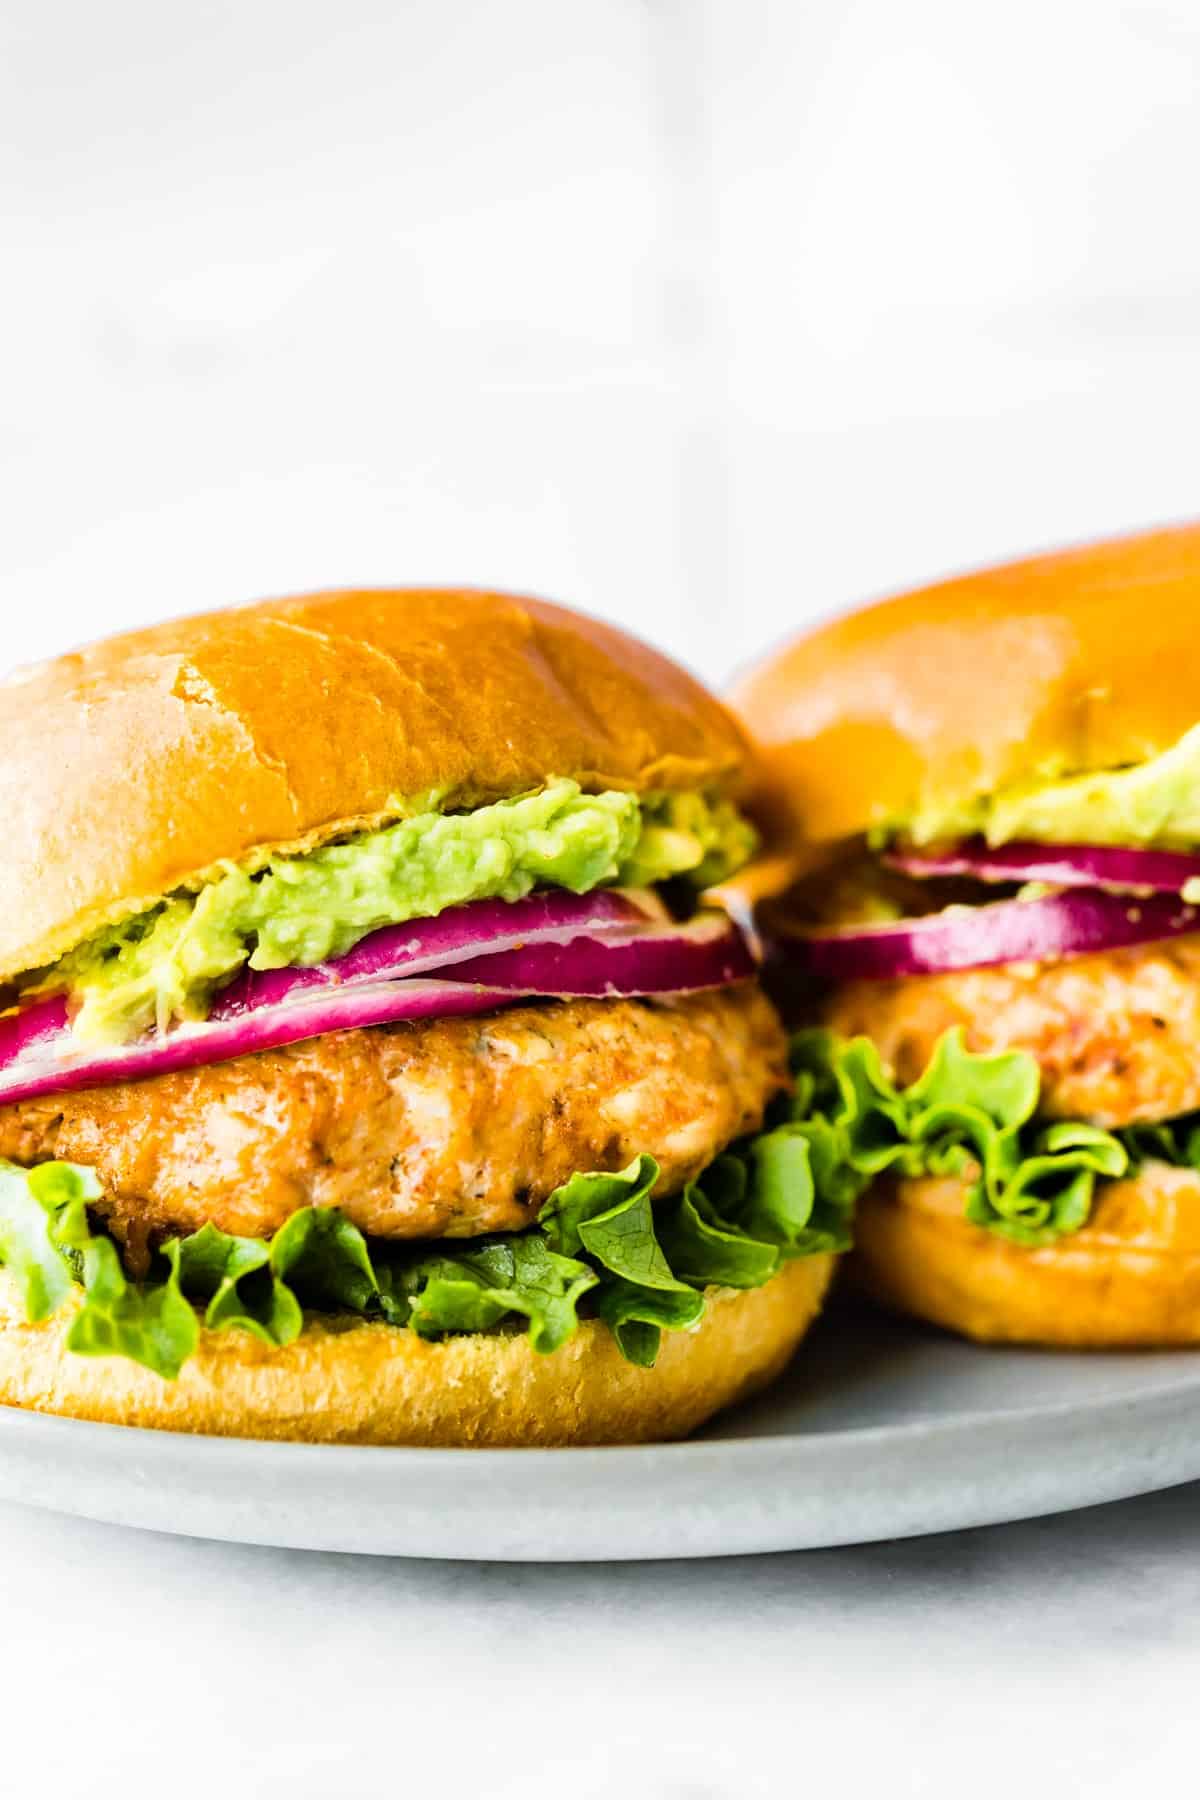 Two ground chicken burgers on buns with lettuce and red onion.